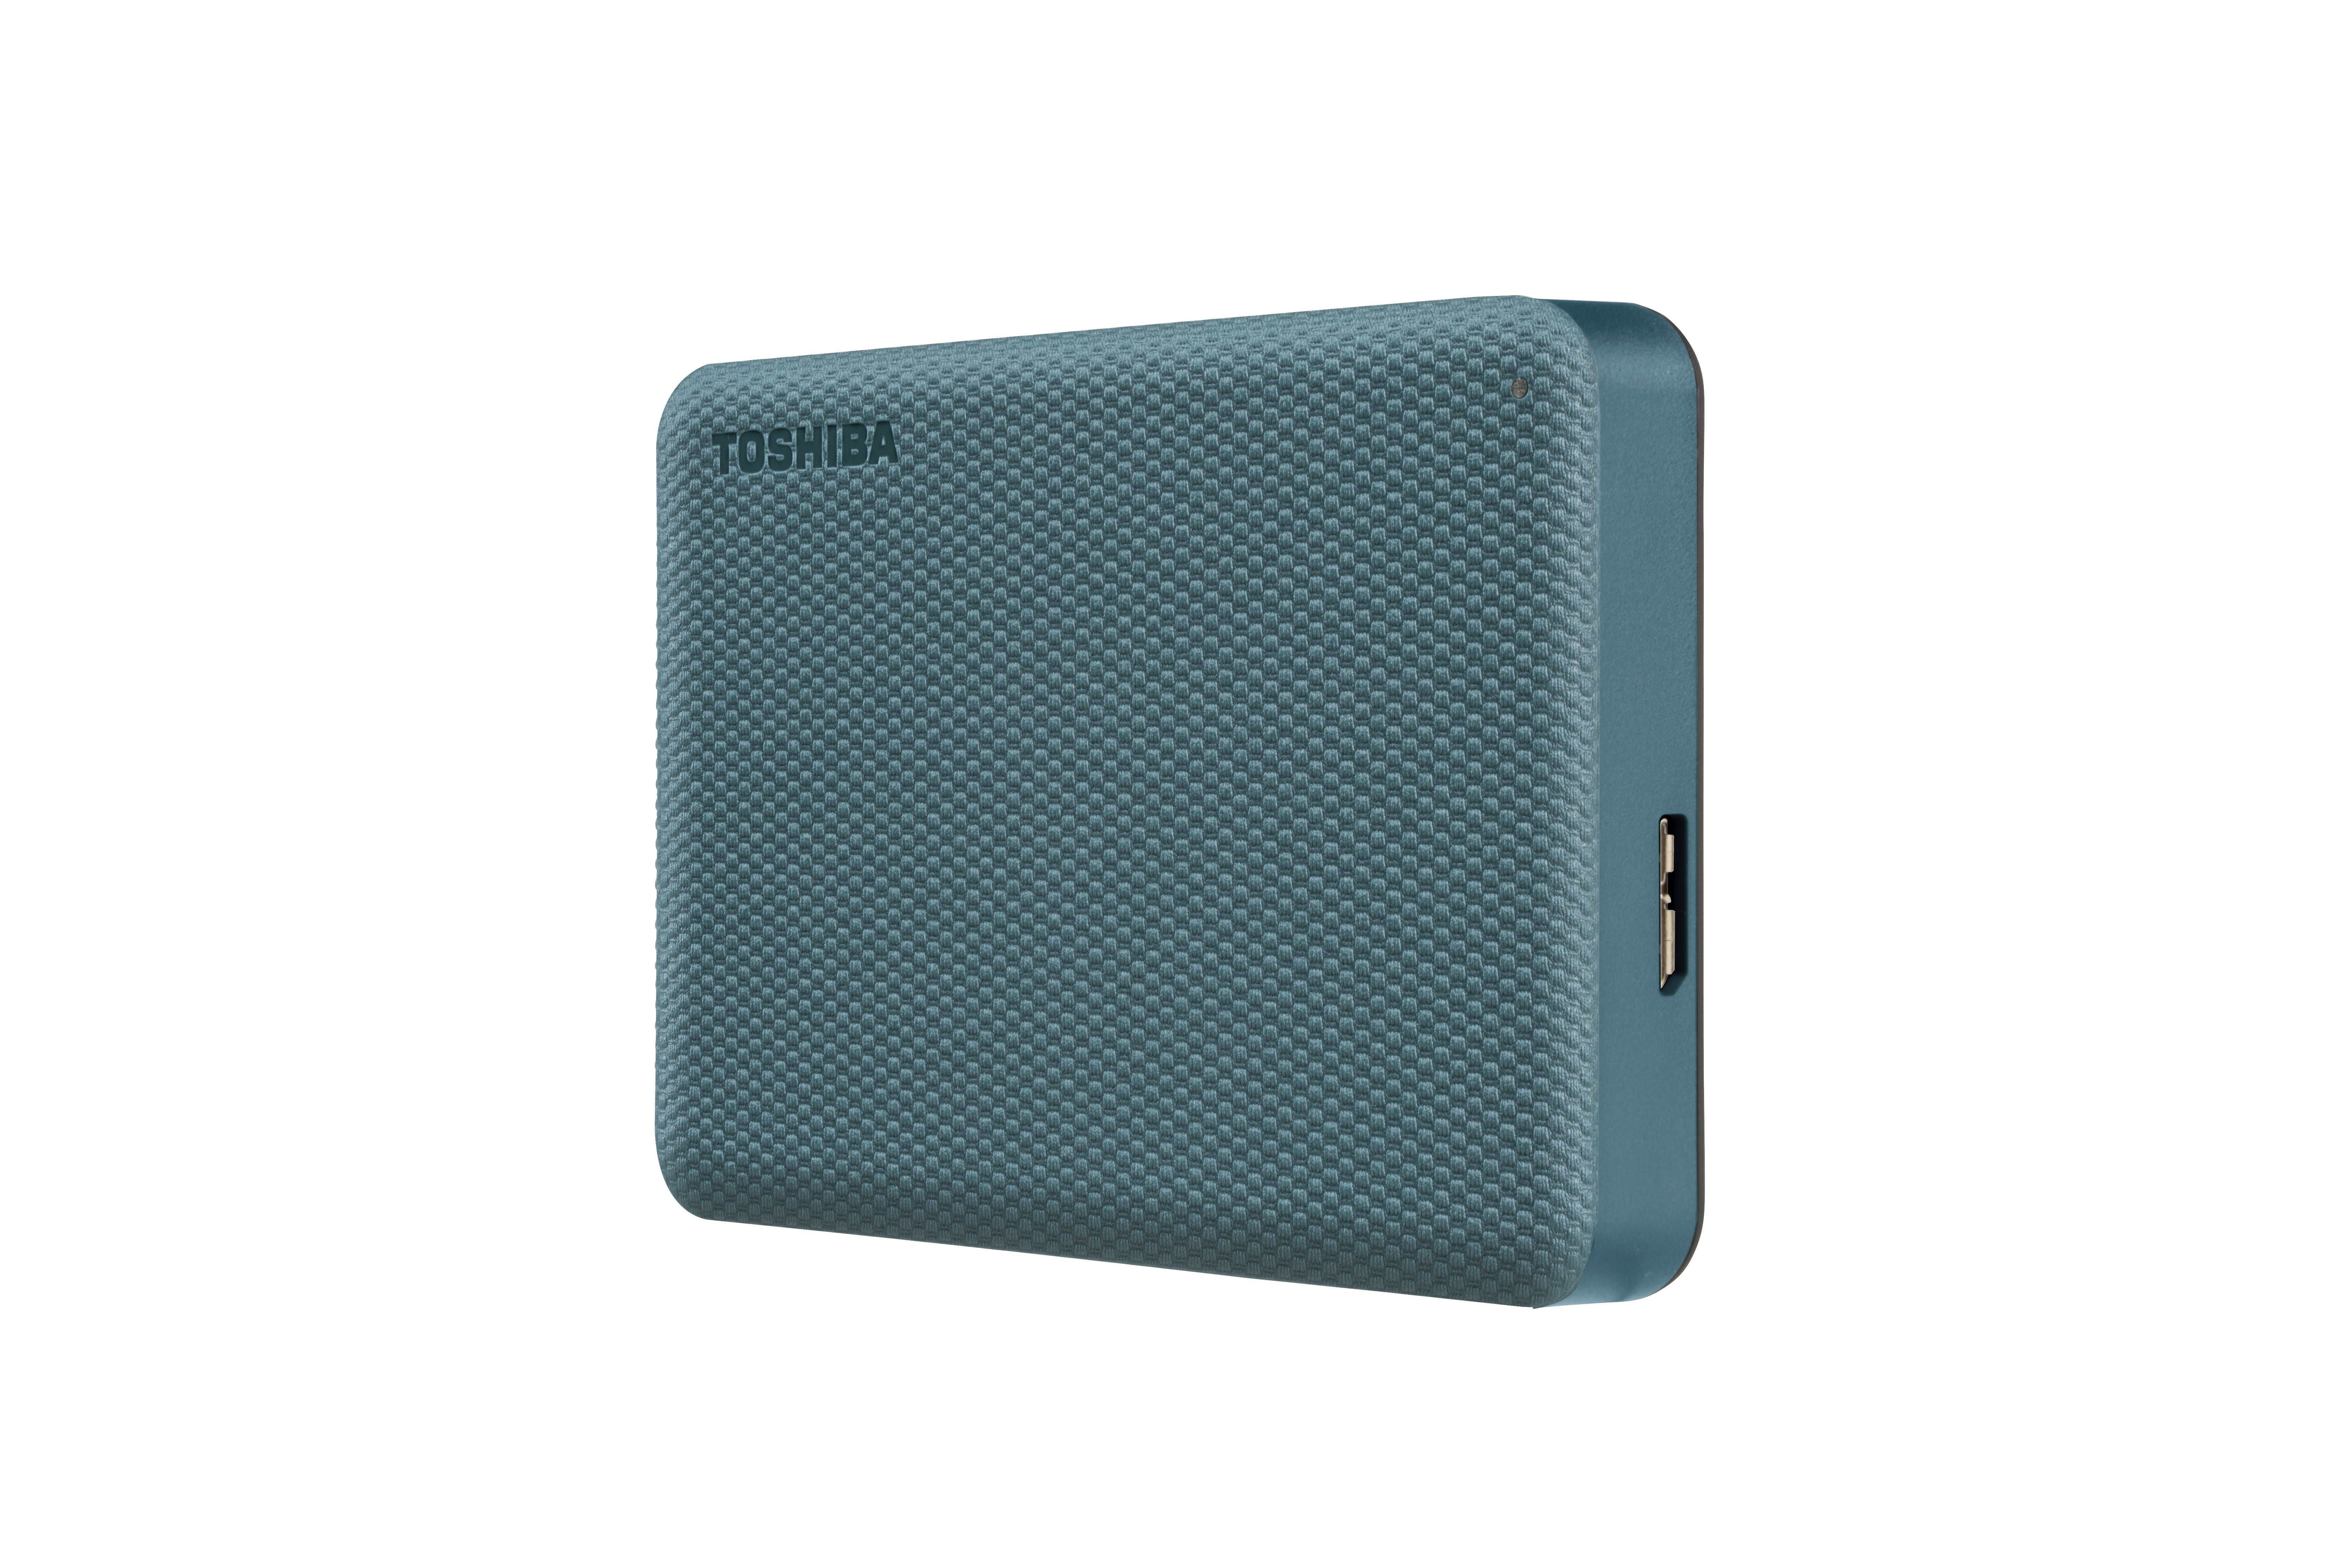 Toshiba CANVIO Advance Plus - Portable External Hard Drive USB 3.0 4TB - Green (Includes both USB-A and USB-C Cables)